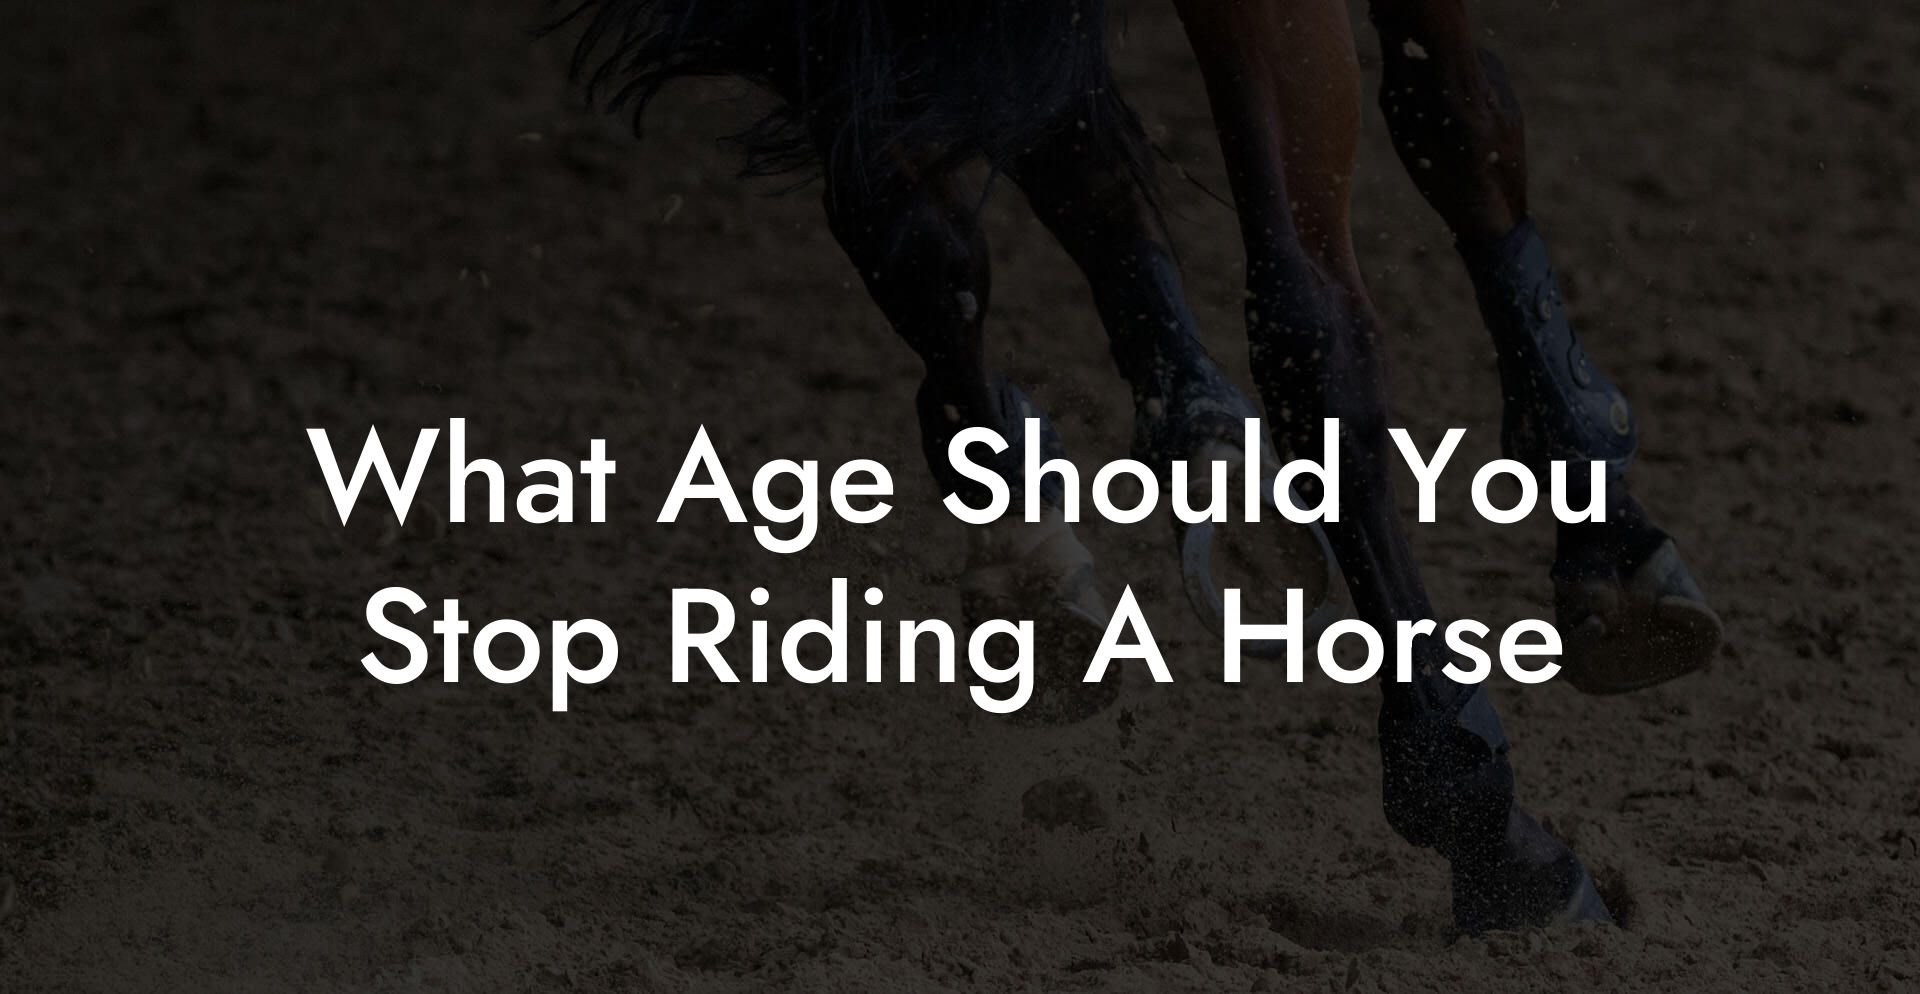 What Age Should You Stop Riding A Horse